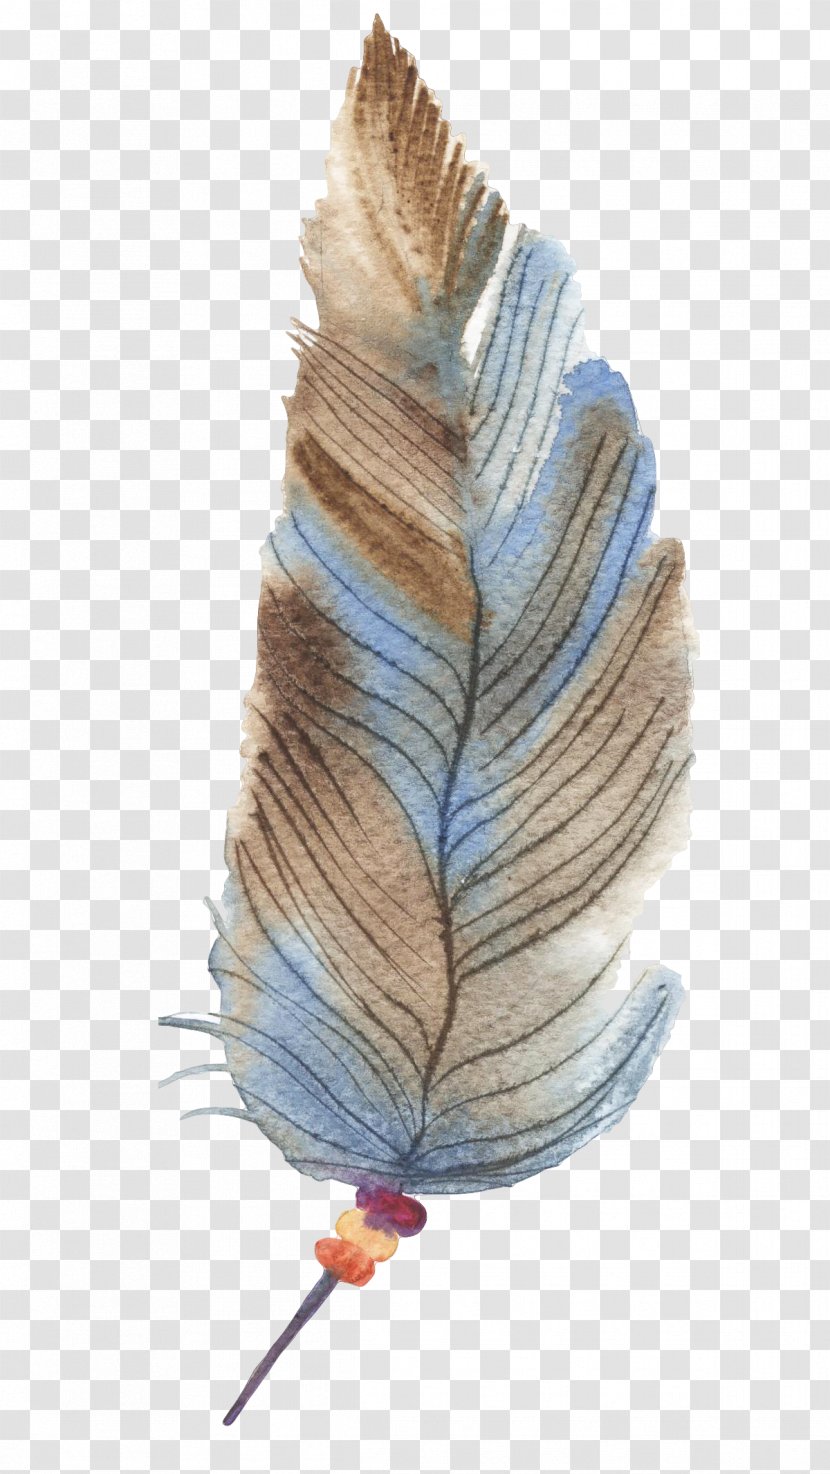 Feather Drawing - Designer - Hand-painted Feathers Transparent PNG